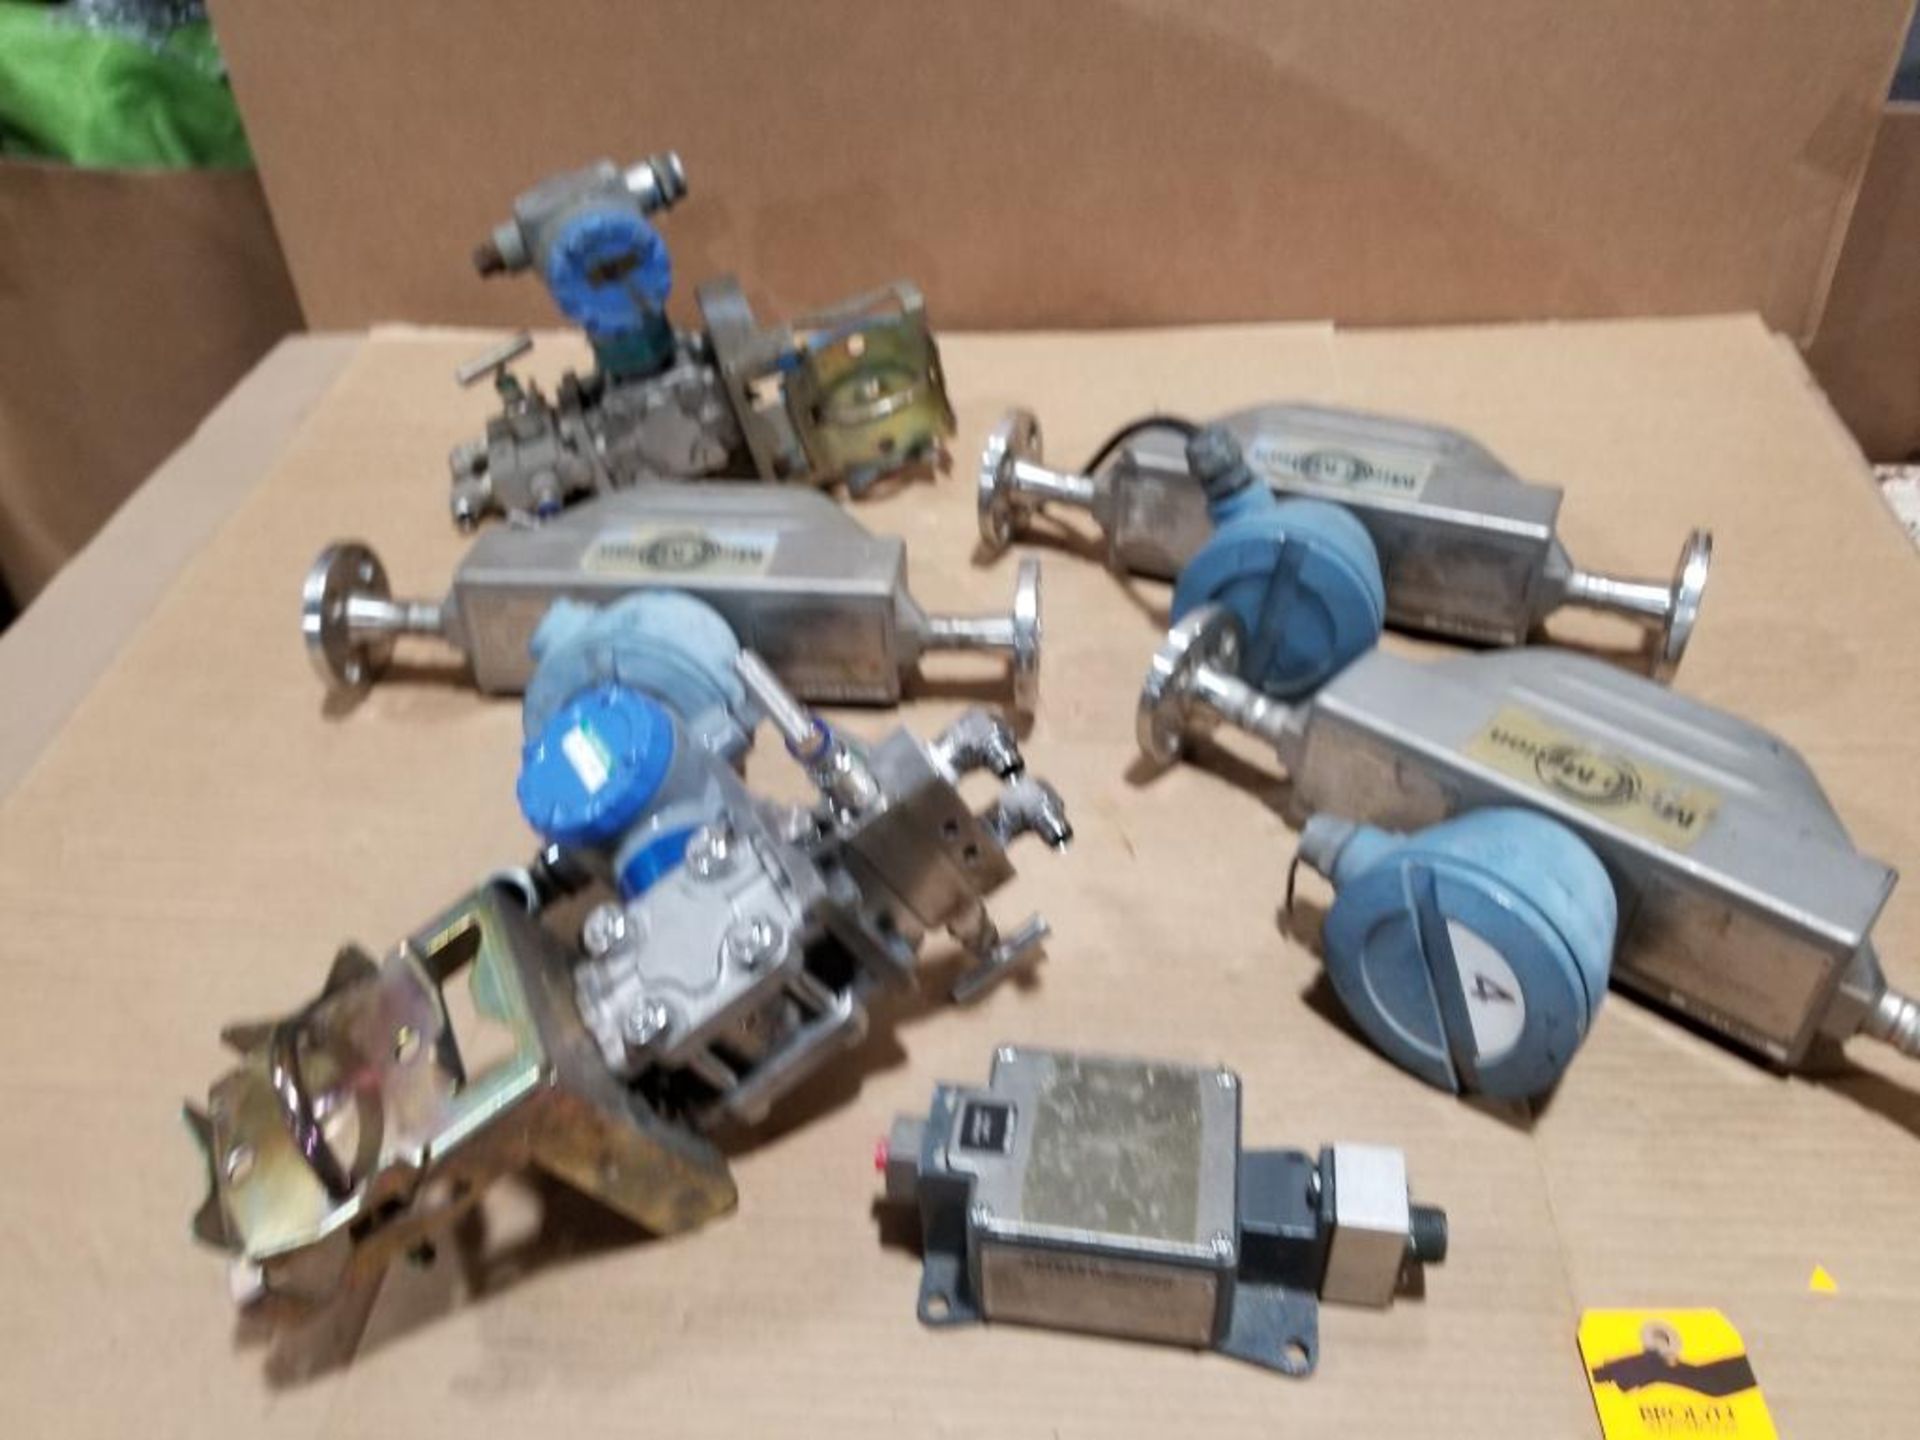 Assorted flowmeters and transmitters.